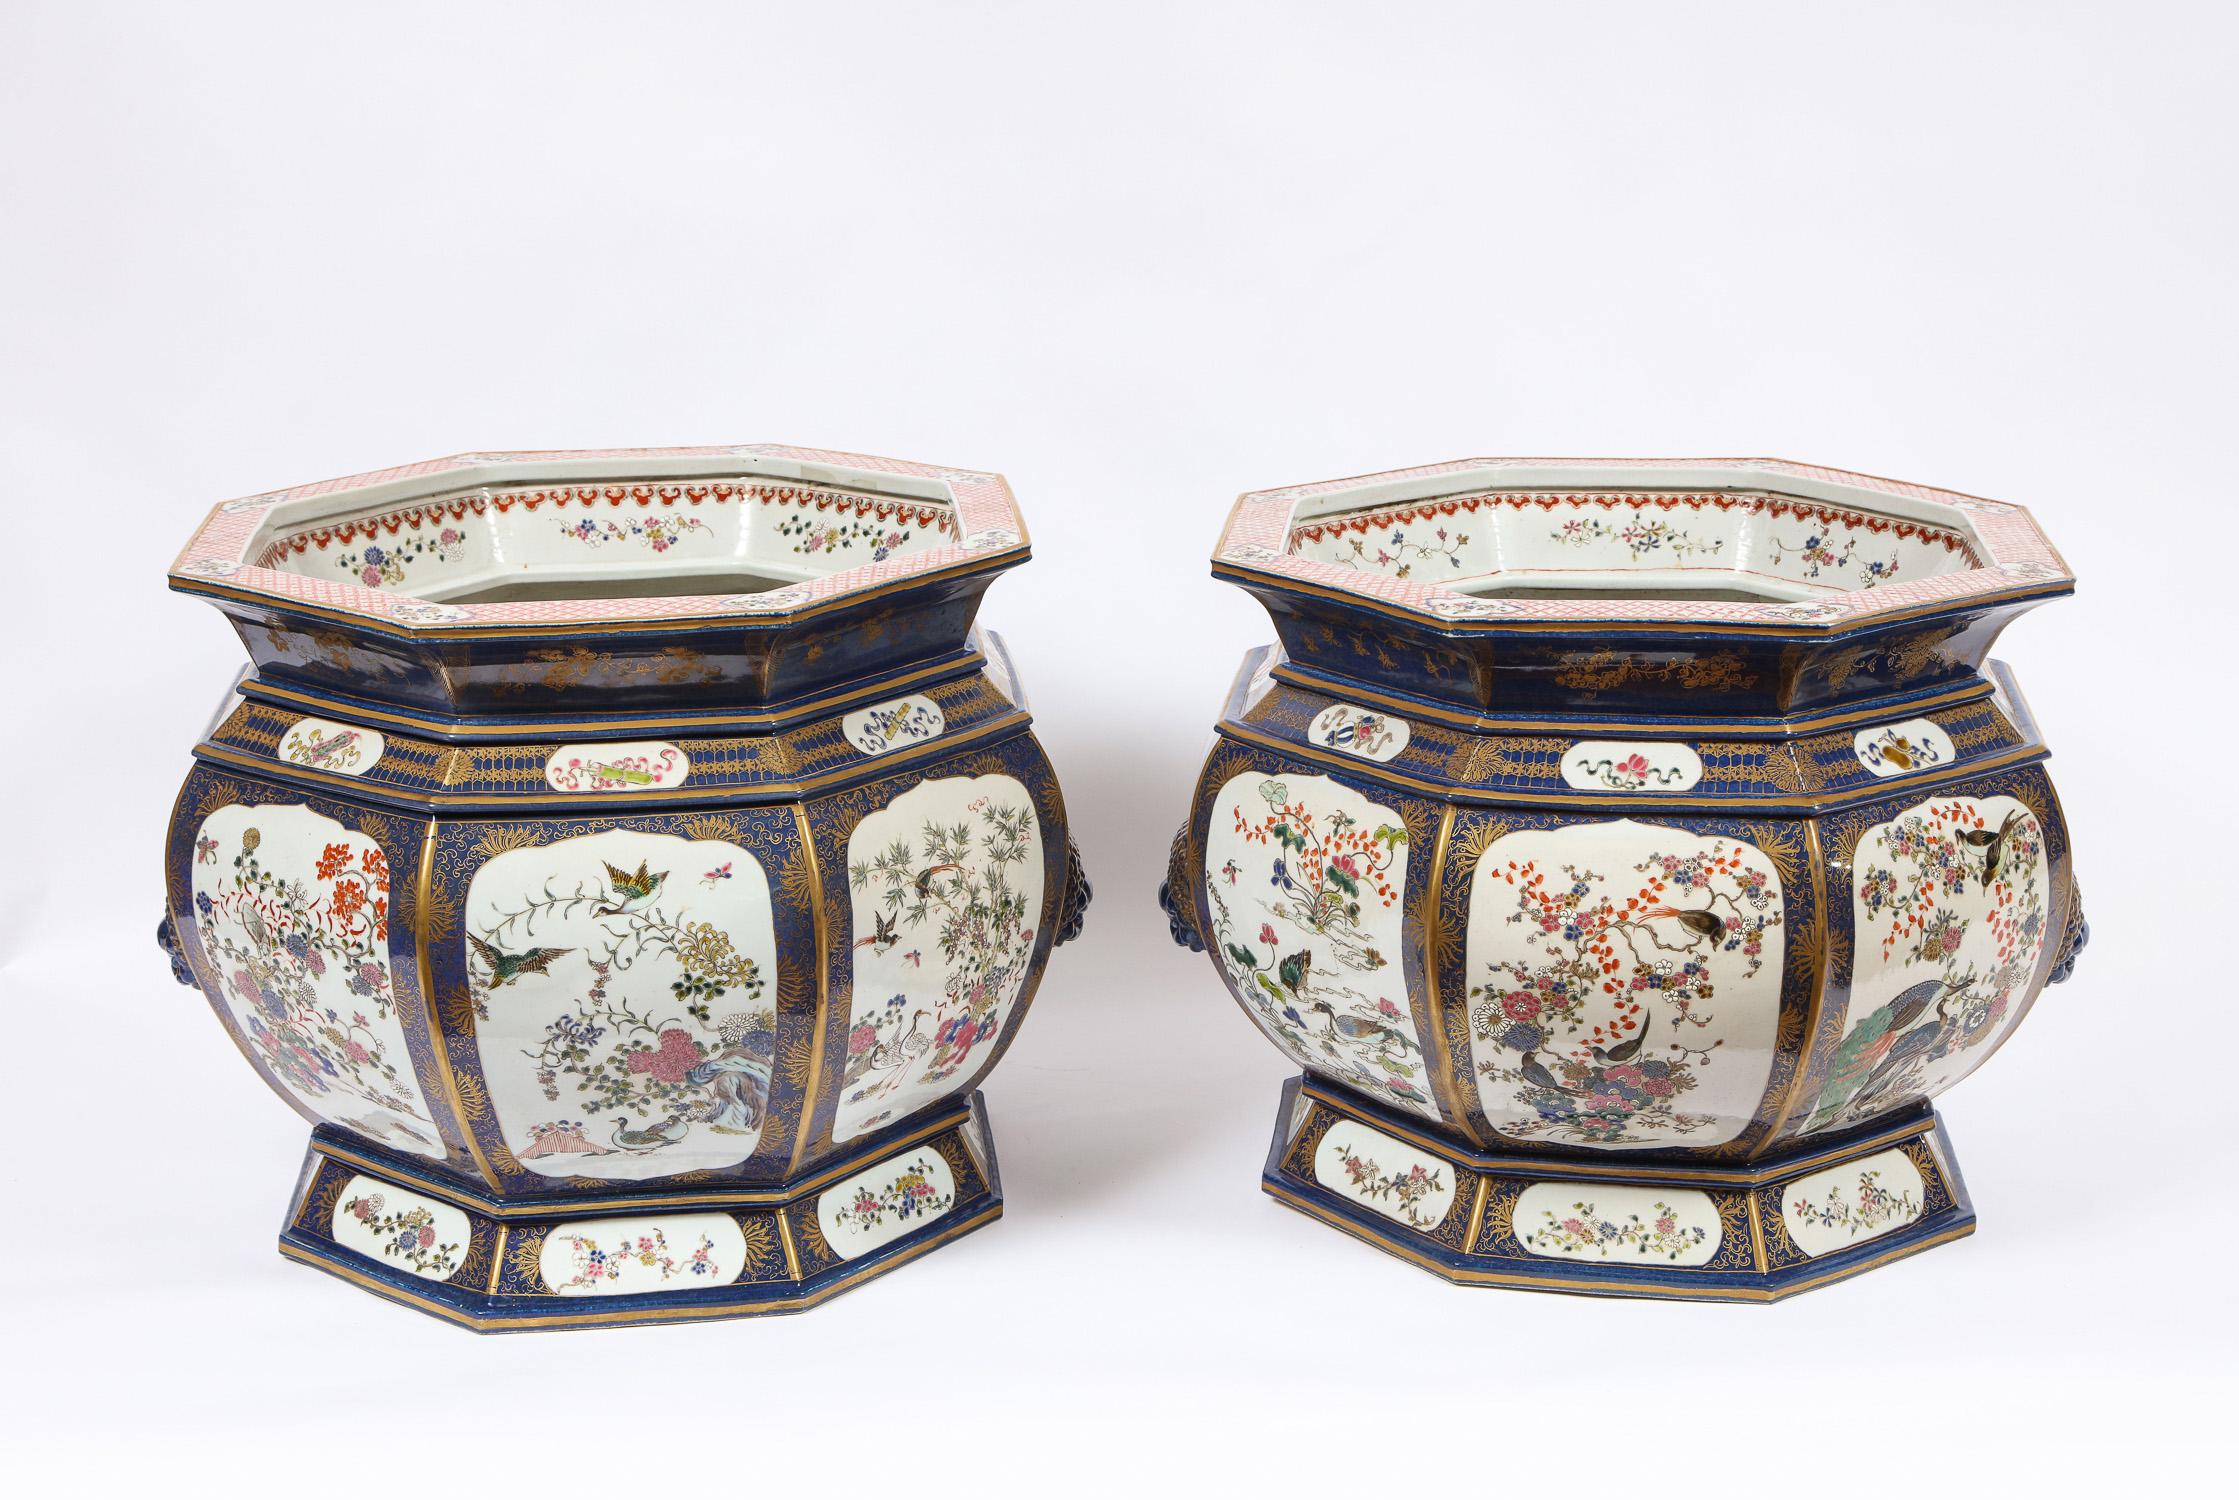 A fabulous and unusual pair of antique blue Chinese porcelain octagonal shaped fishbowls/ jardeniers painted with cartouches of flowers, birds, and fruit. Each of the bowls have beautifully designed foo-lion mask handles. The insides are elaborately